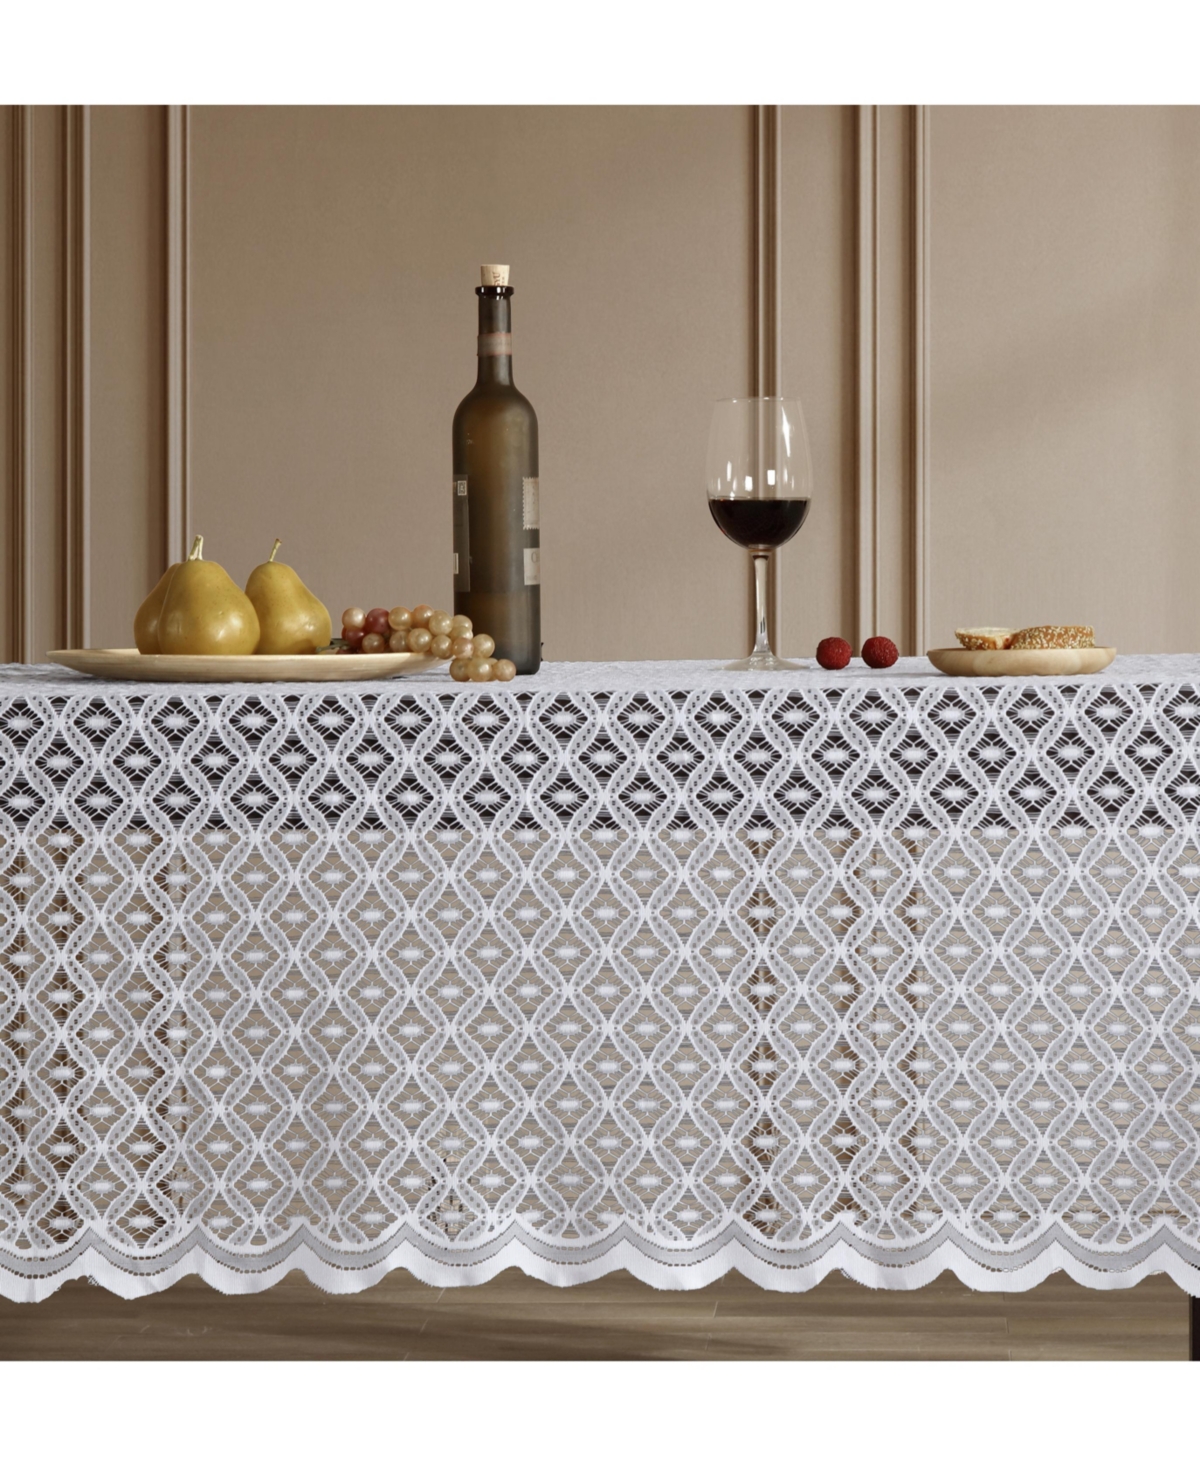 Alona Lace Fabric Table Cloth for Rectangle Tables, Wrinkle Resistant Tablecloth, Patterned Scalloped - White